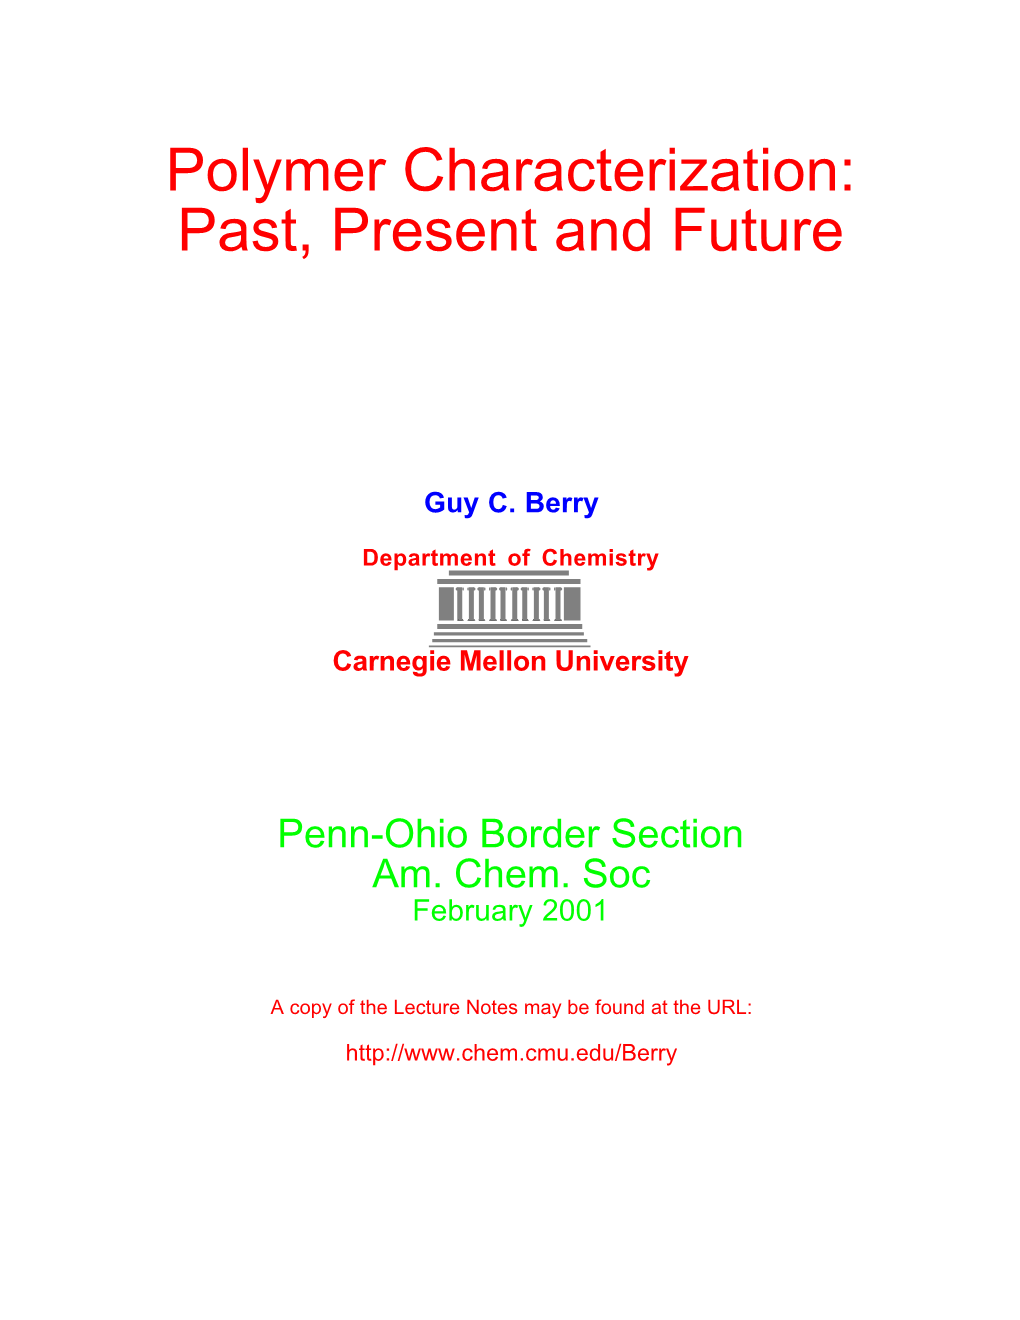 Polymer Characterization: Past, Present and Future